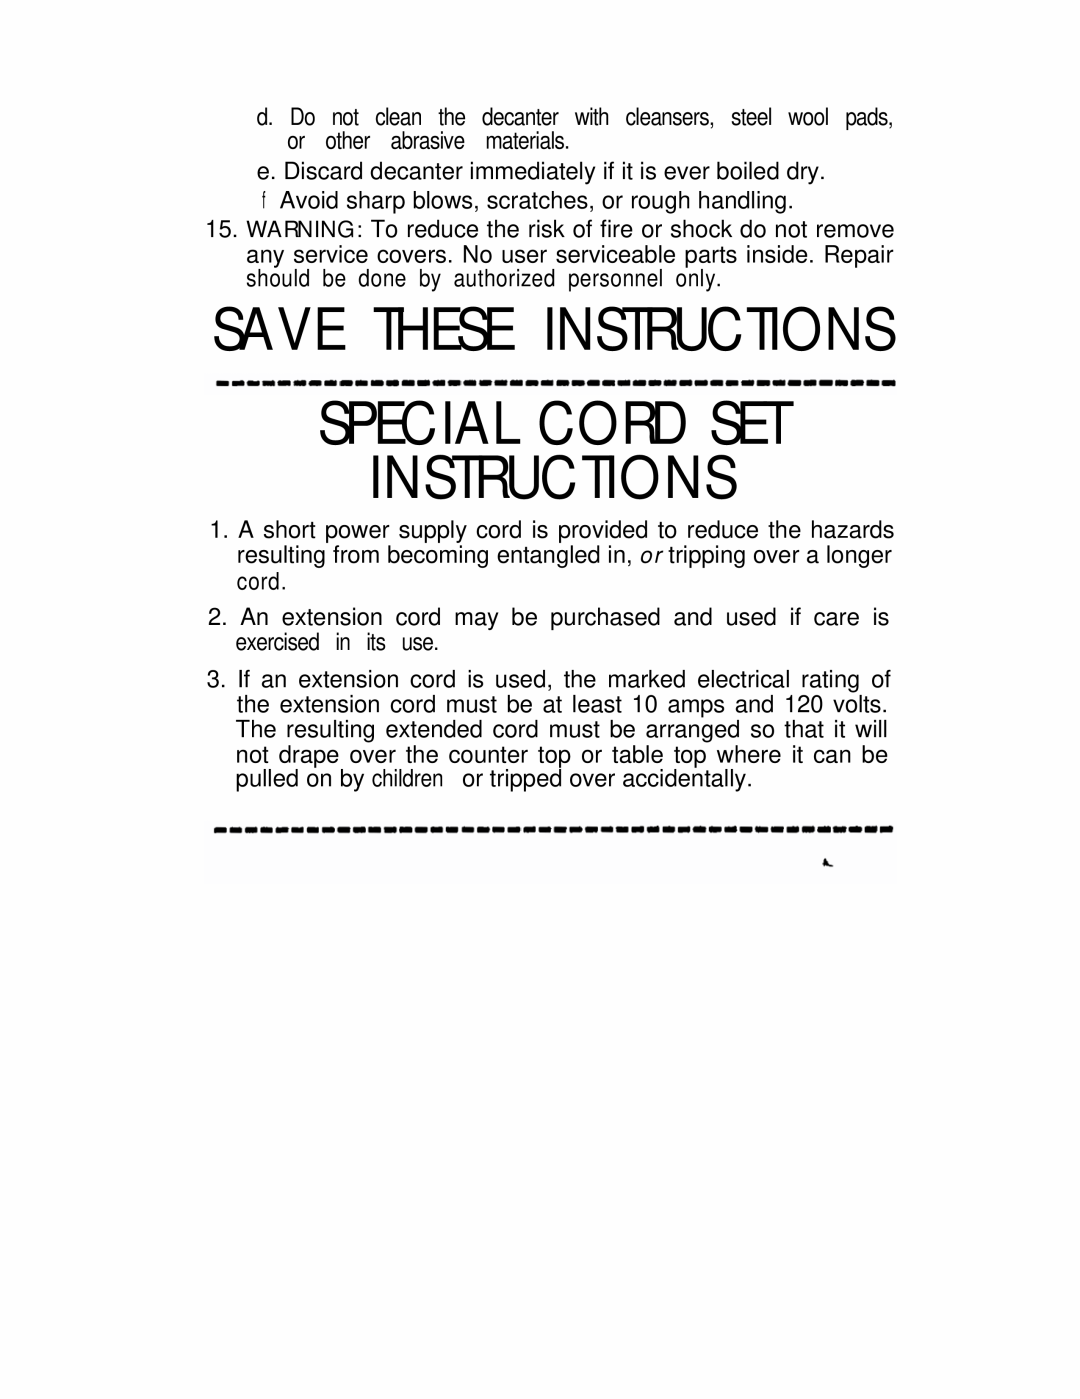 Mr. Coffee EXP1 or EXP3 operating instructions Save These Instructions Special Cord Set 